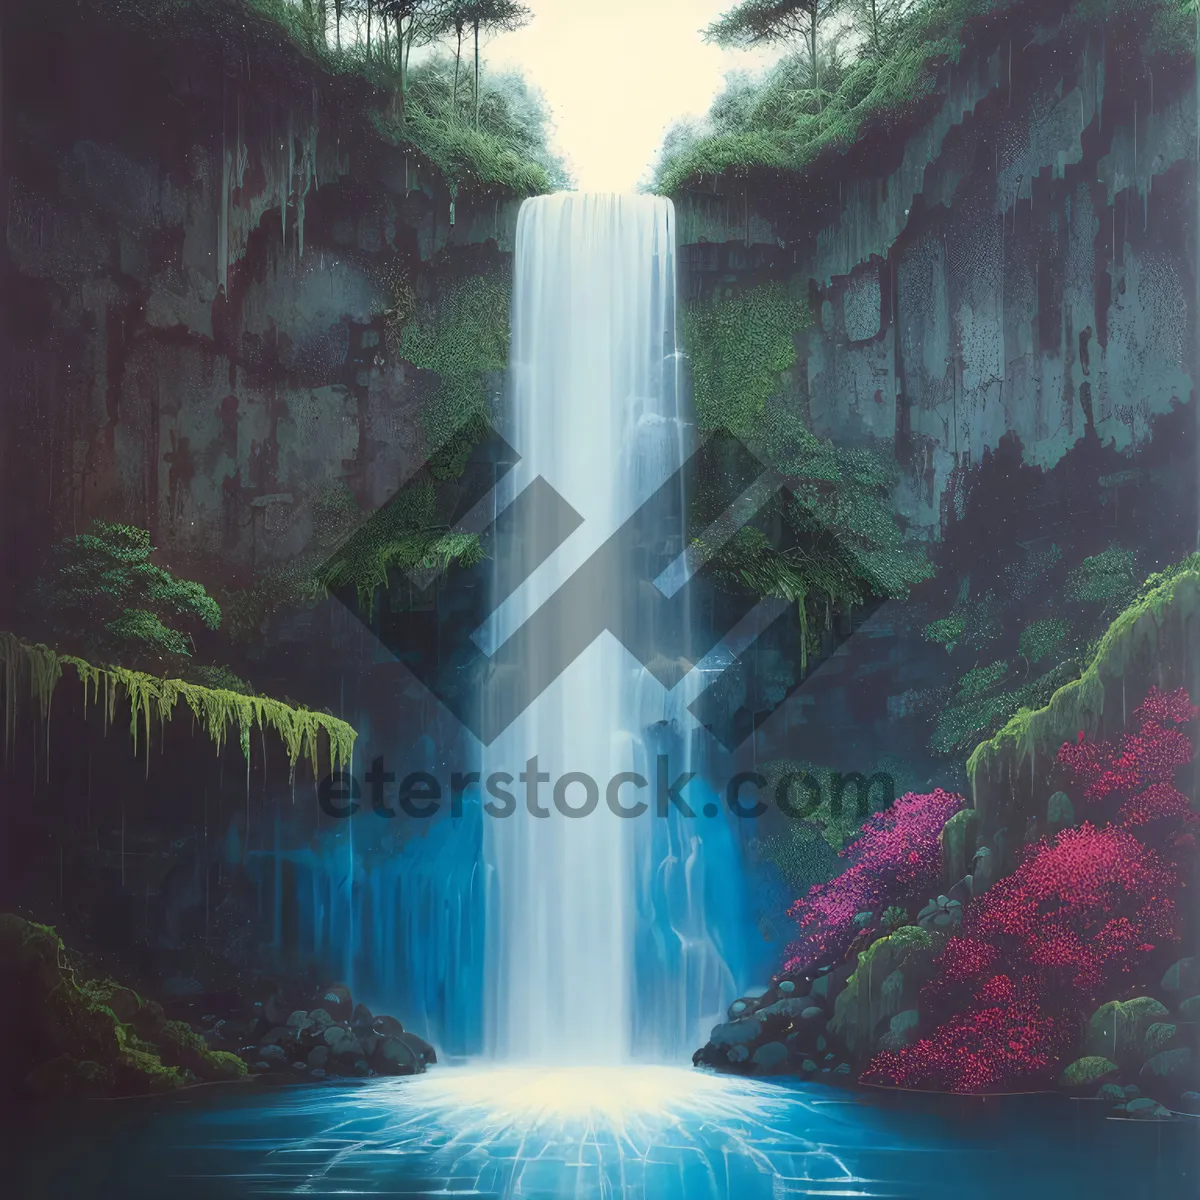 Picture of Peaceful Waterfall in Serene Forest Landscape